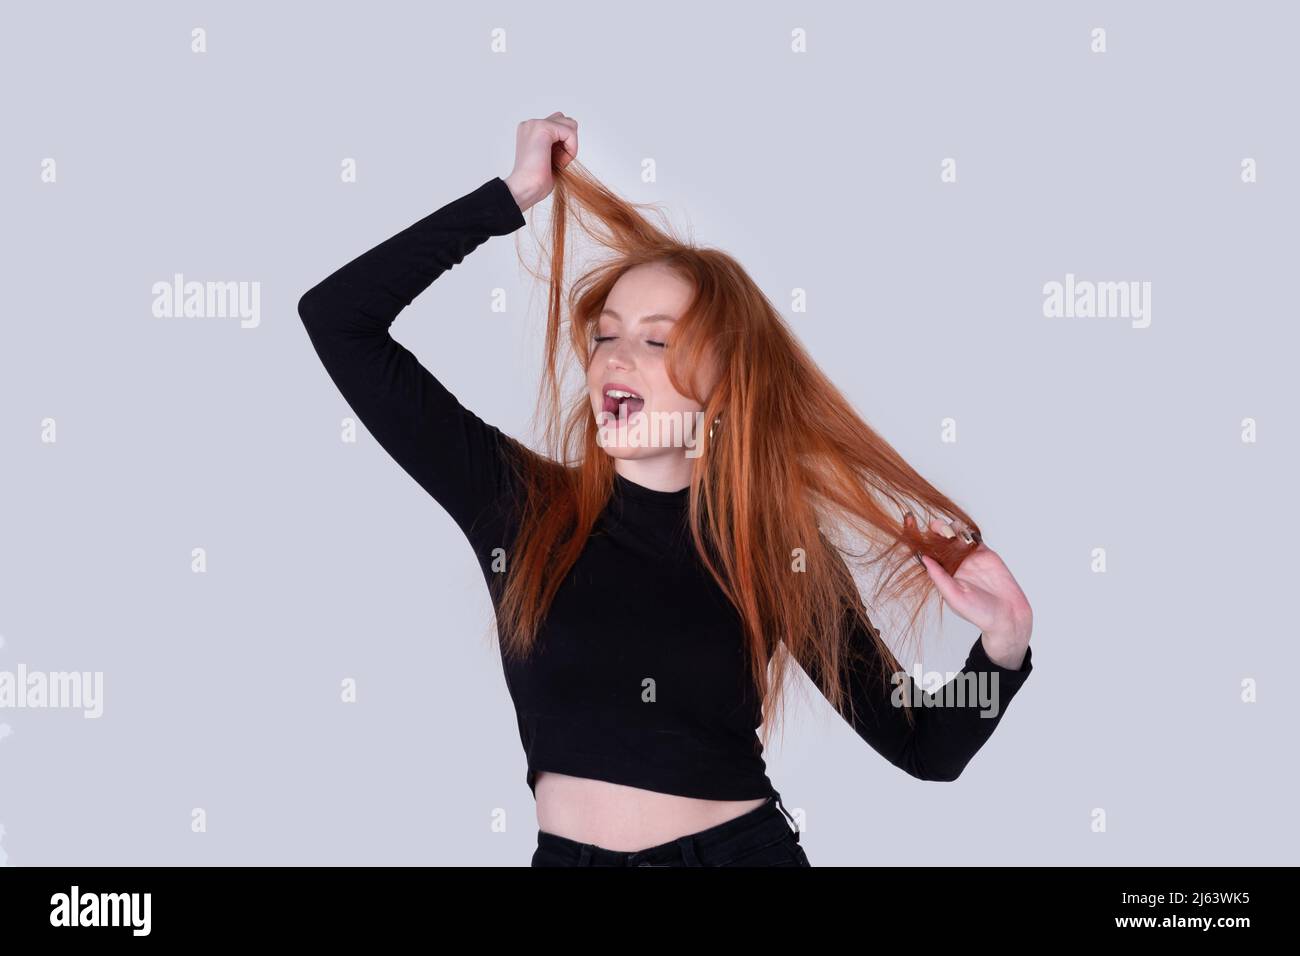 young woman with tousled hair stretches on a light background Stock Photo